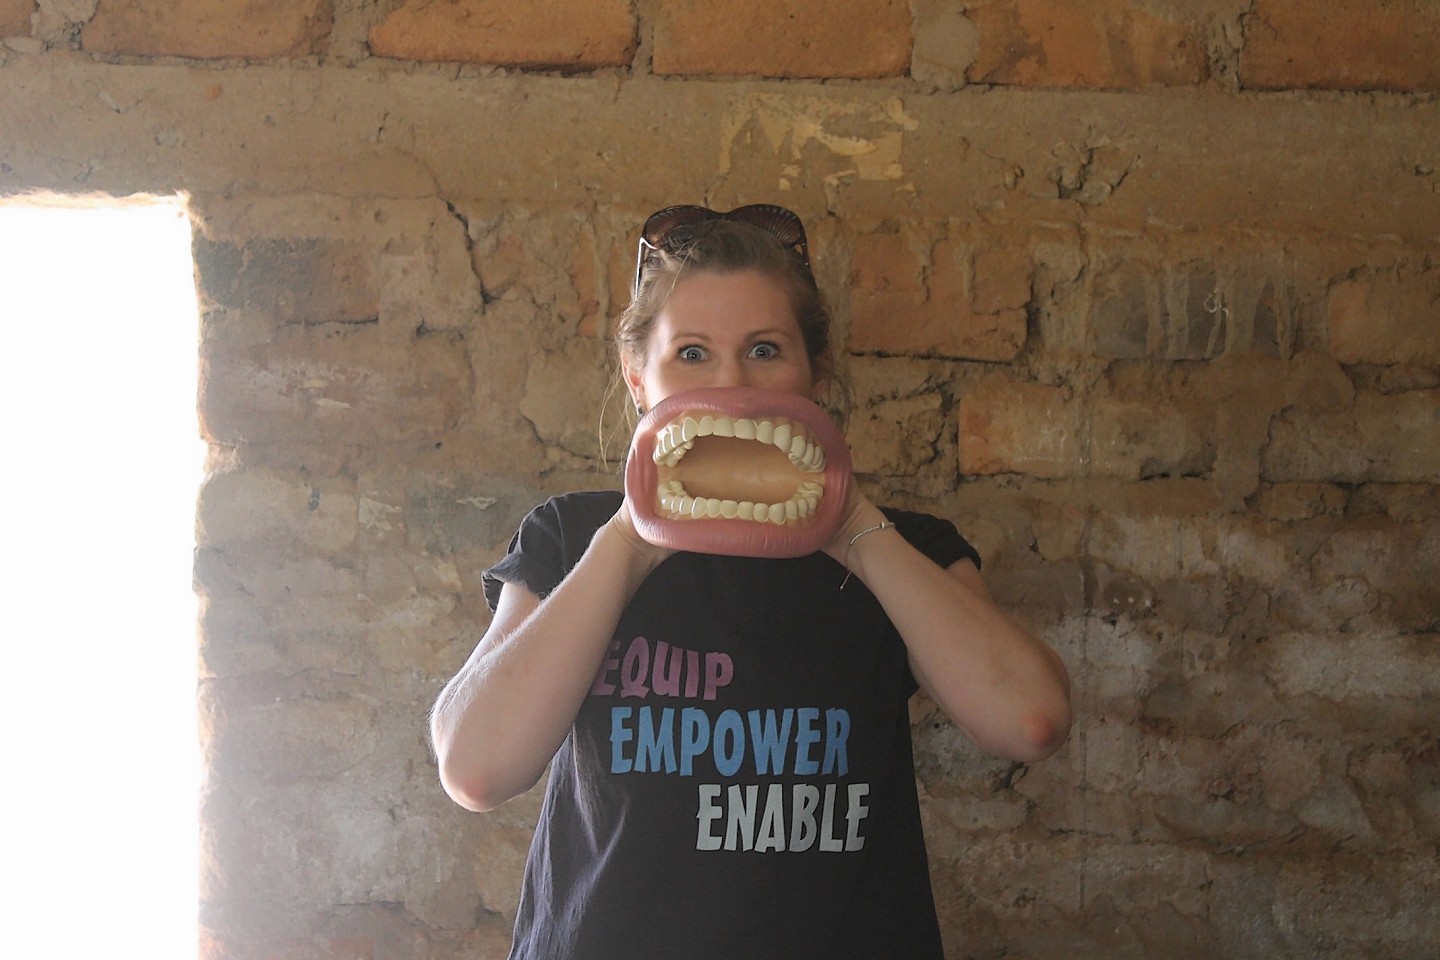 Dentist Clare Lowe made a difference in Tanzania